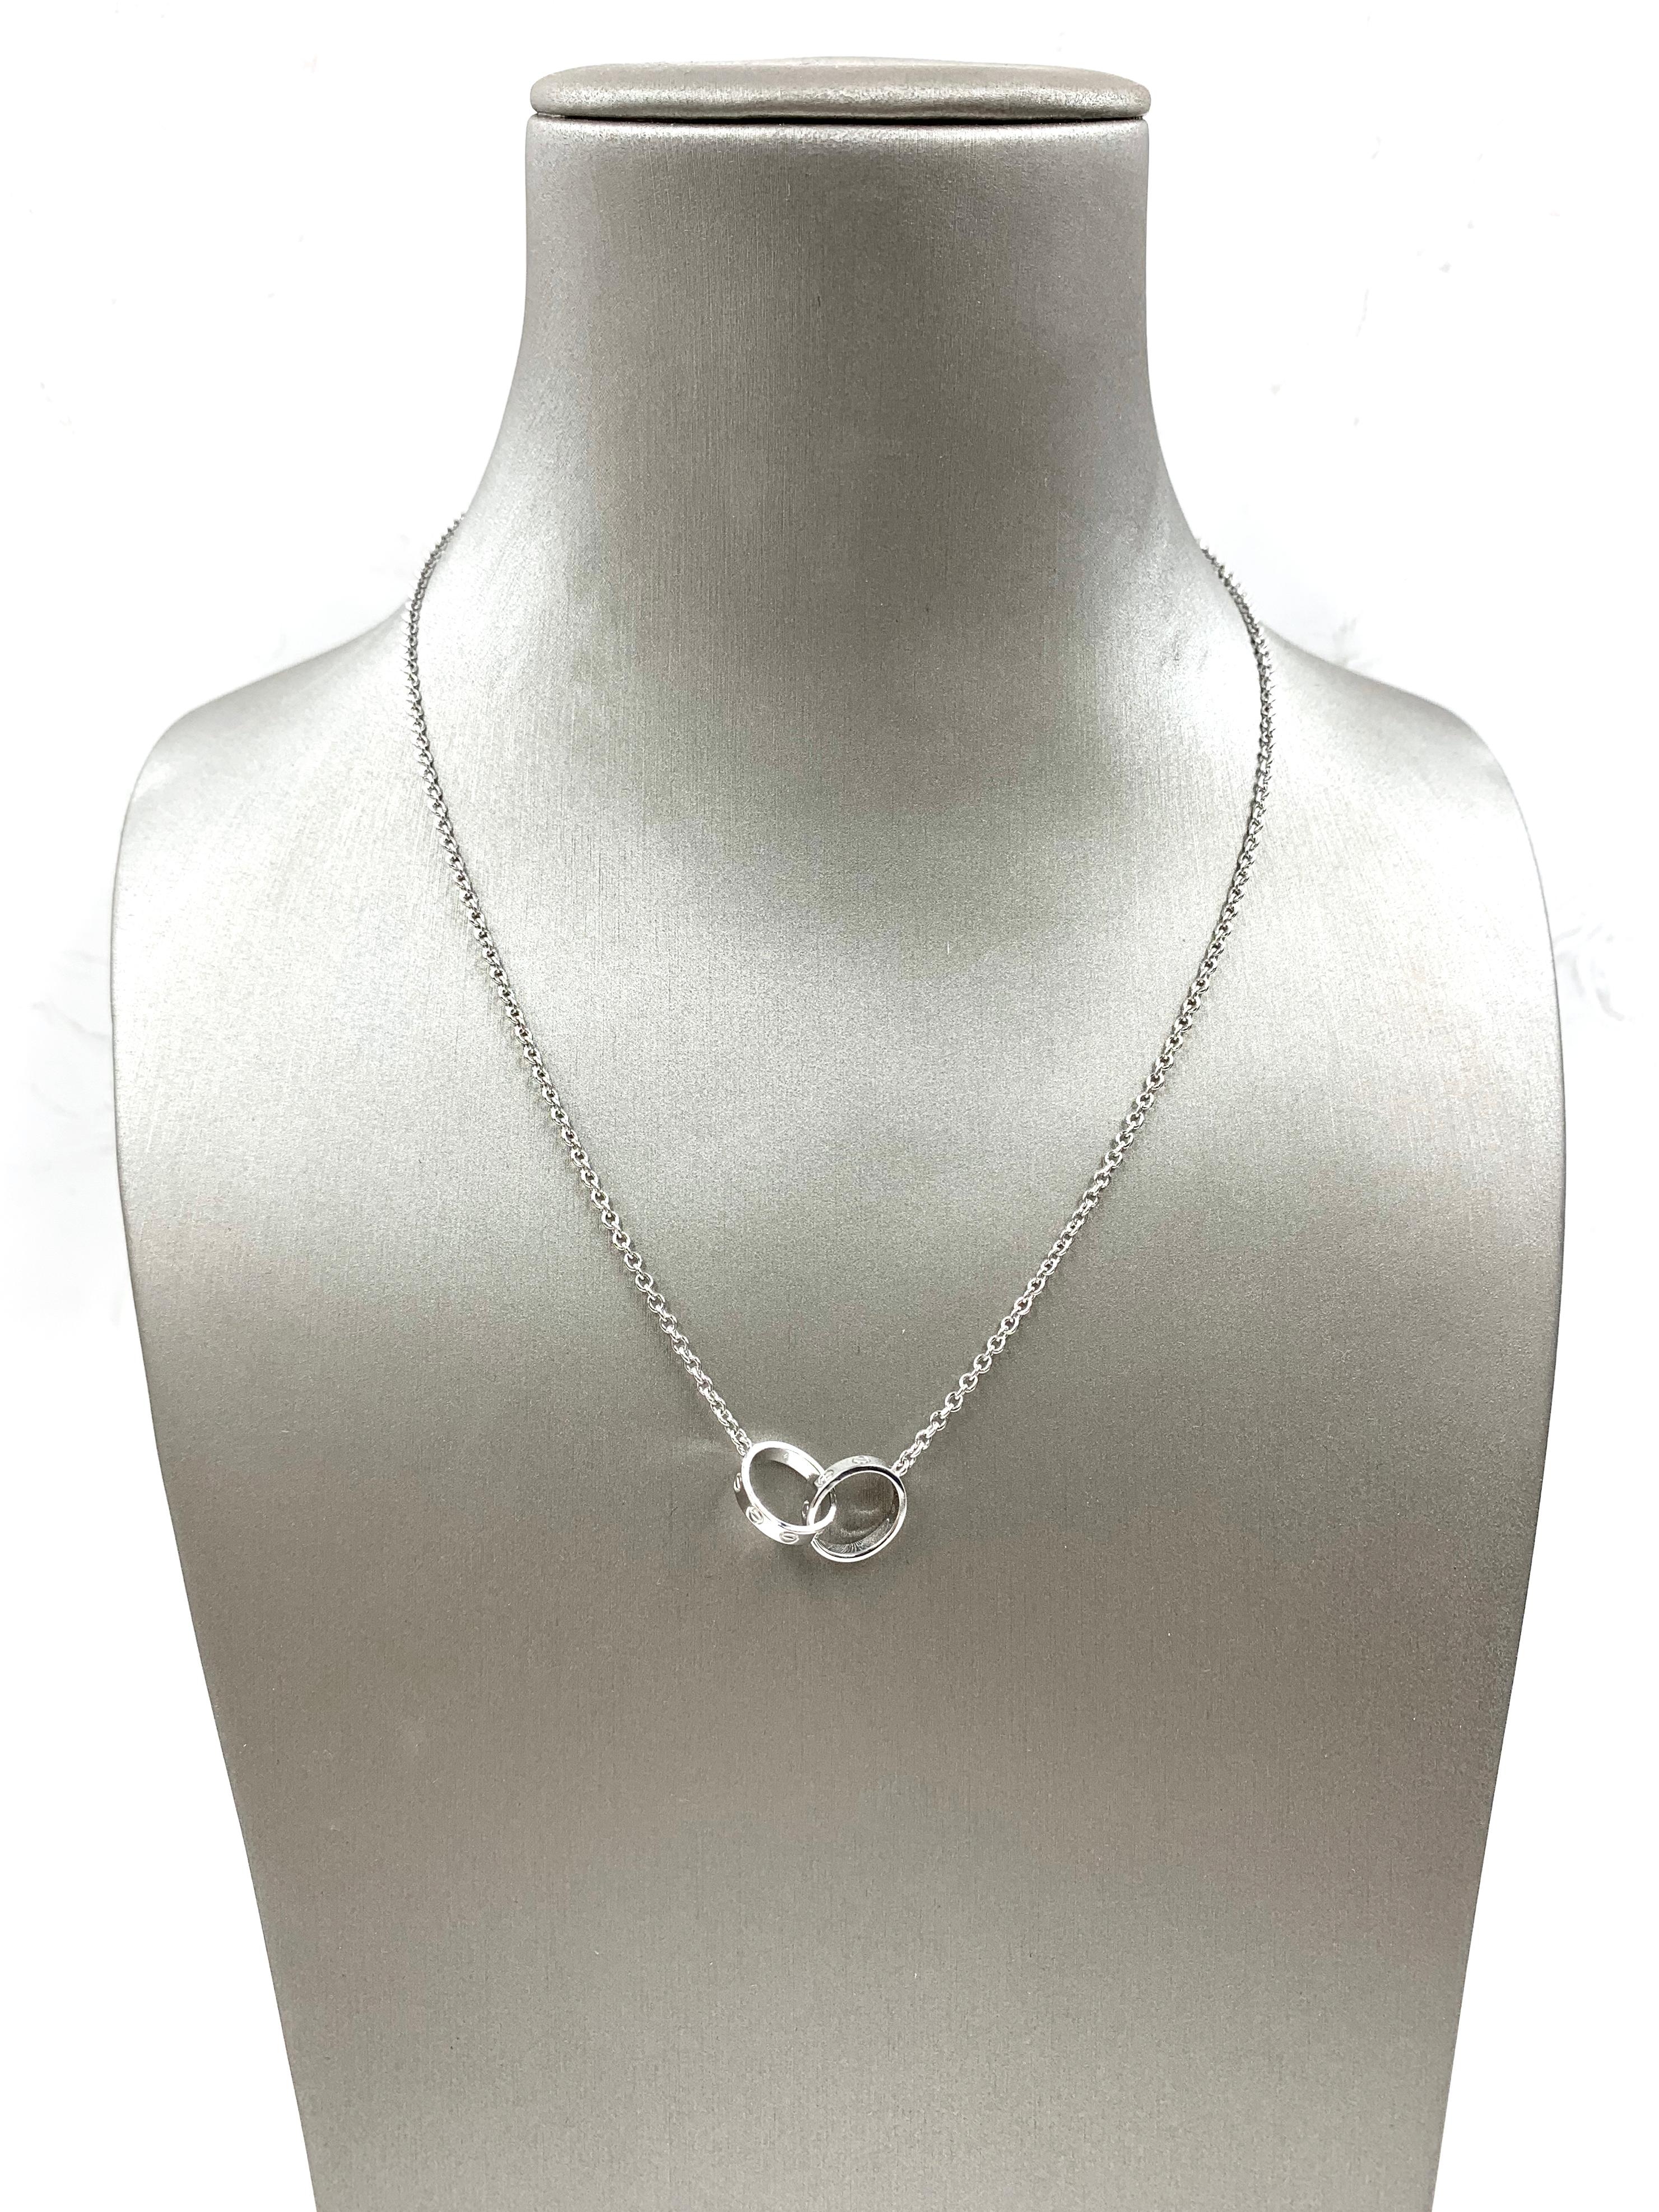 Cartier White Gold Two-Circle Love Necklace In Excellent Condition For Sale In New York, NY